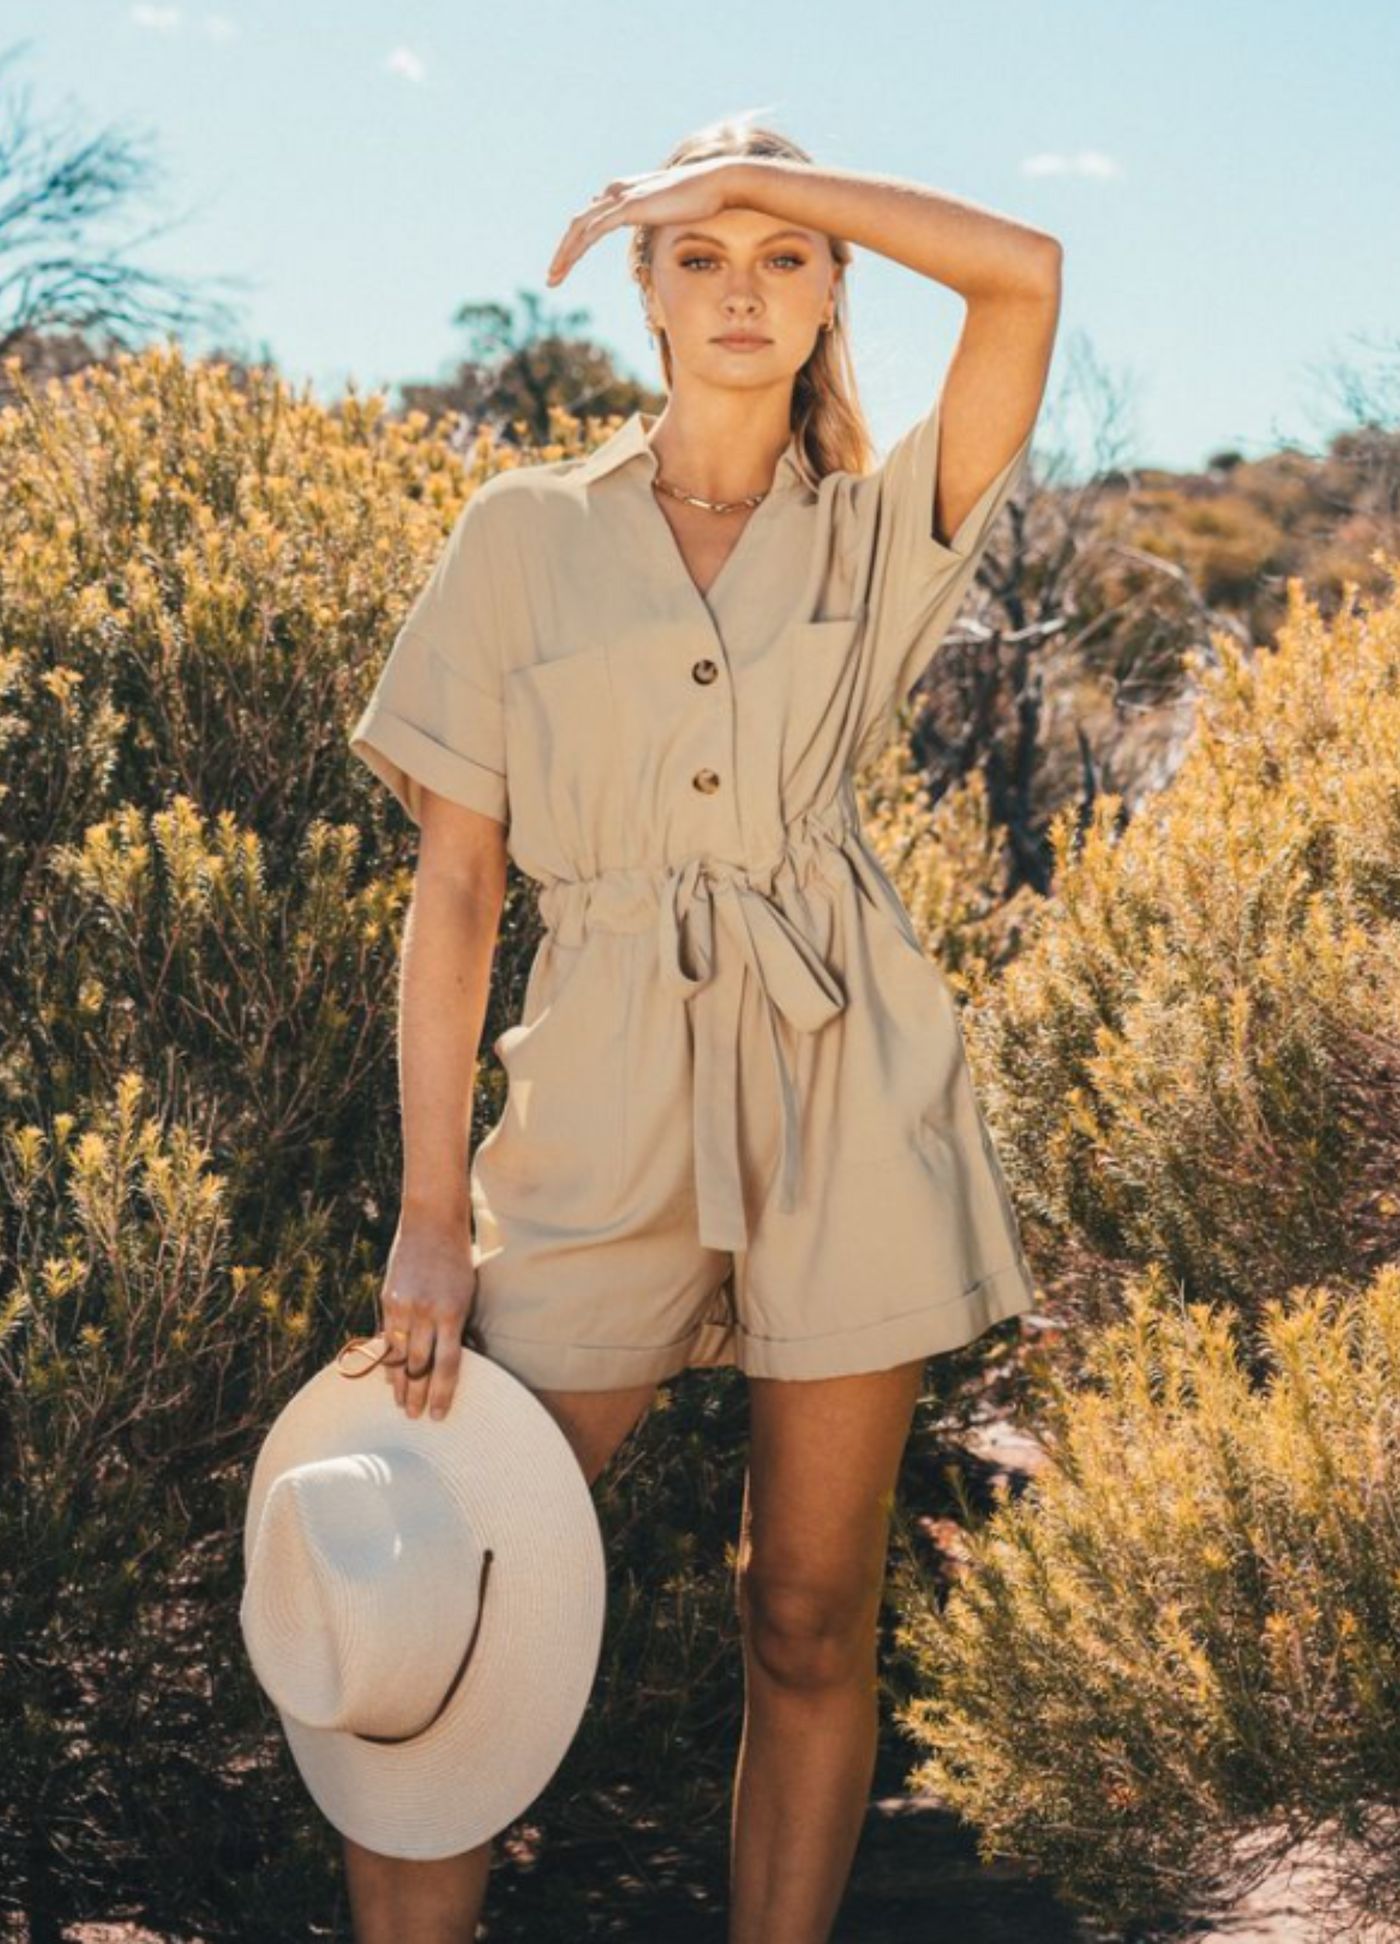 Model wearing safari style playsuit with functional buttons, collar and self belt